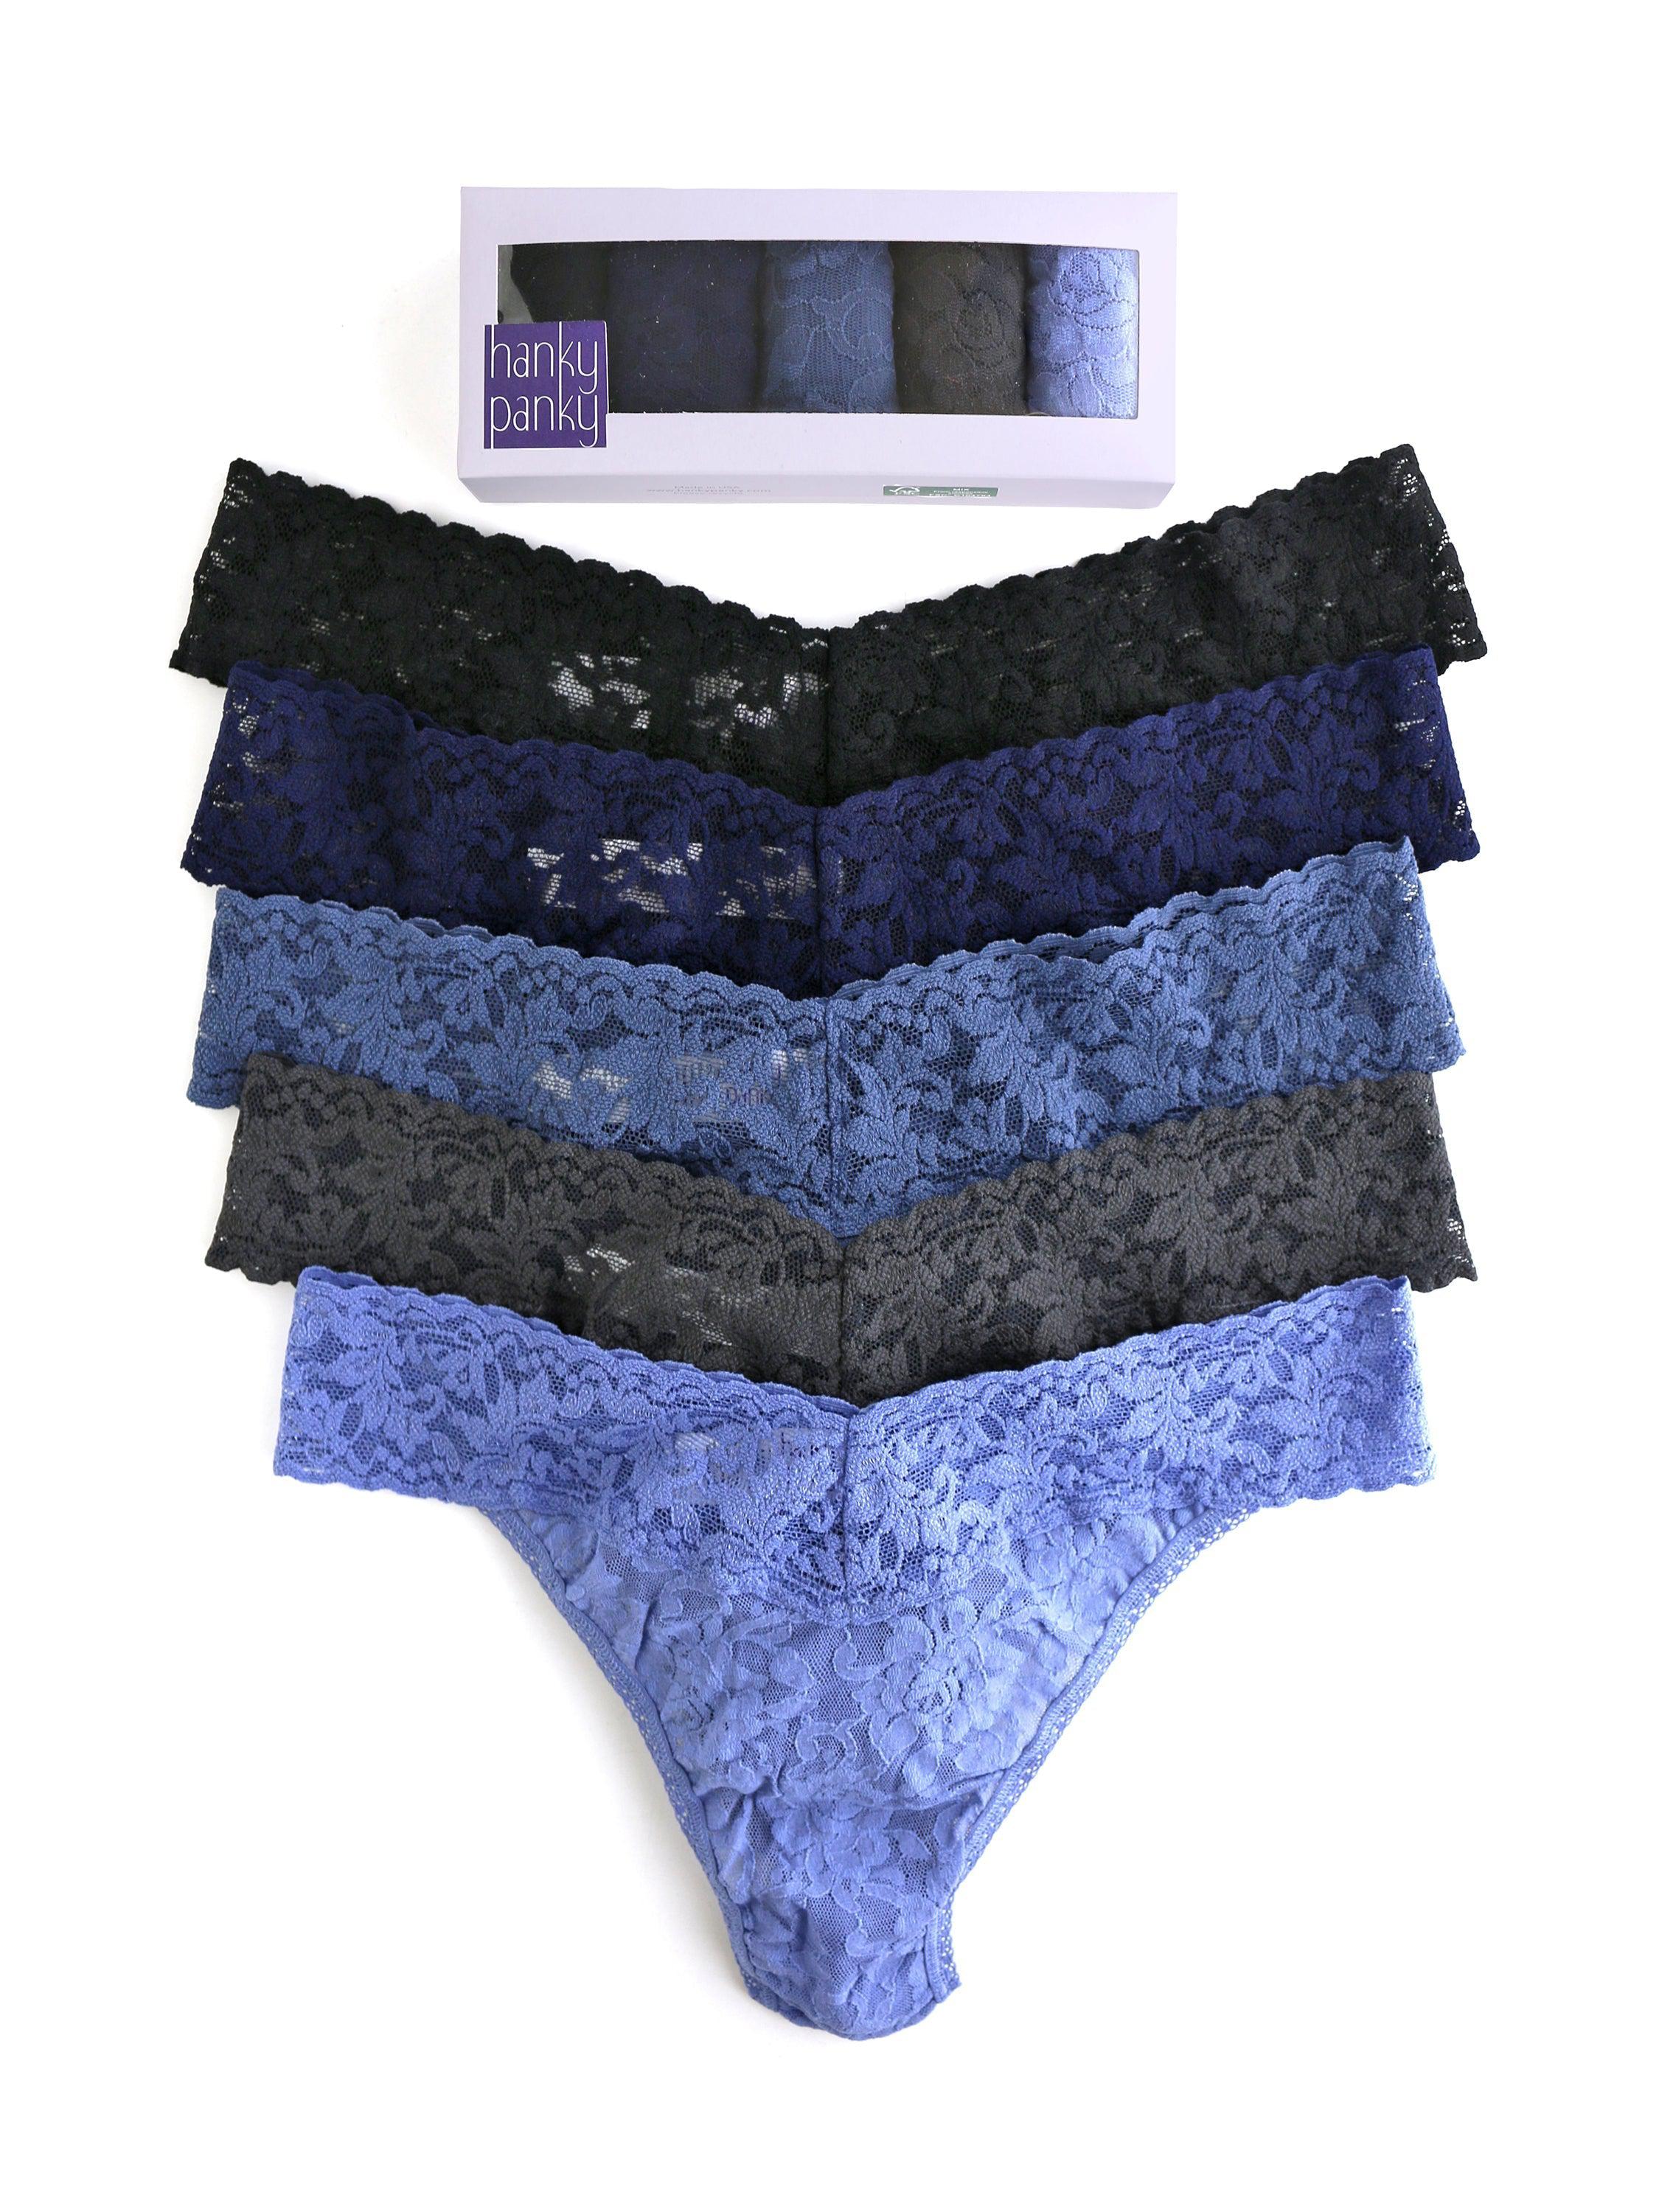 hanky panky, Original Rise 5 Pack, one size fits 4-14